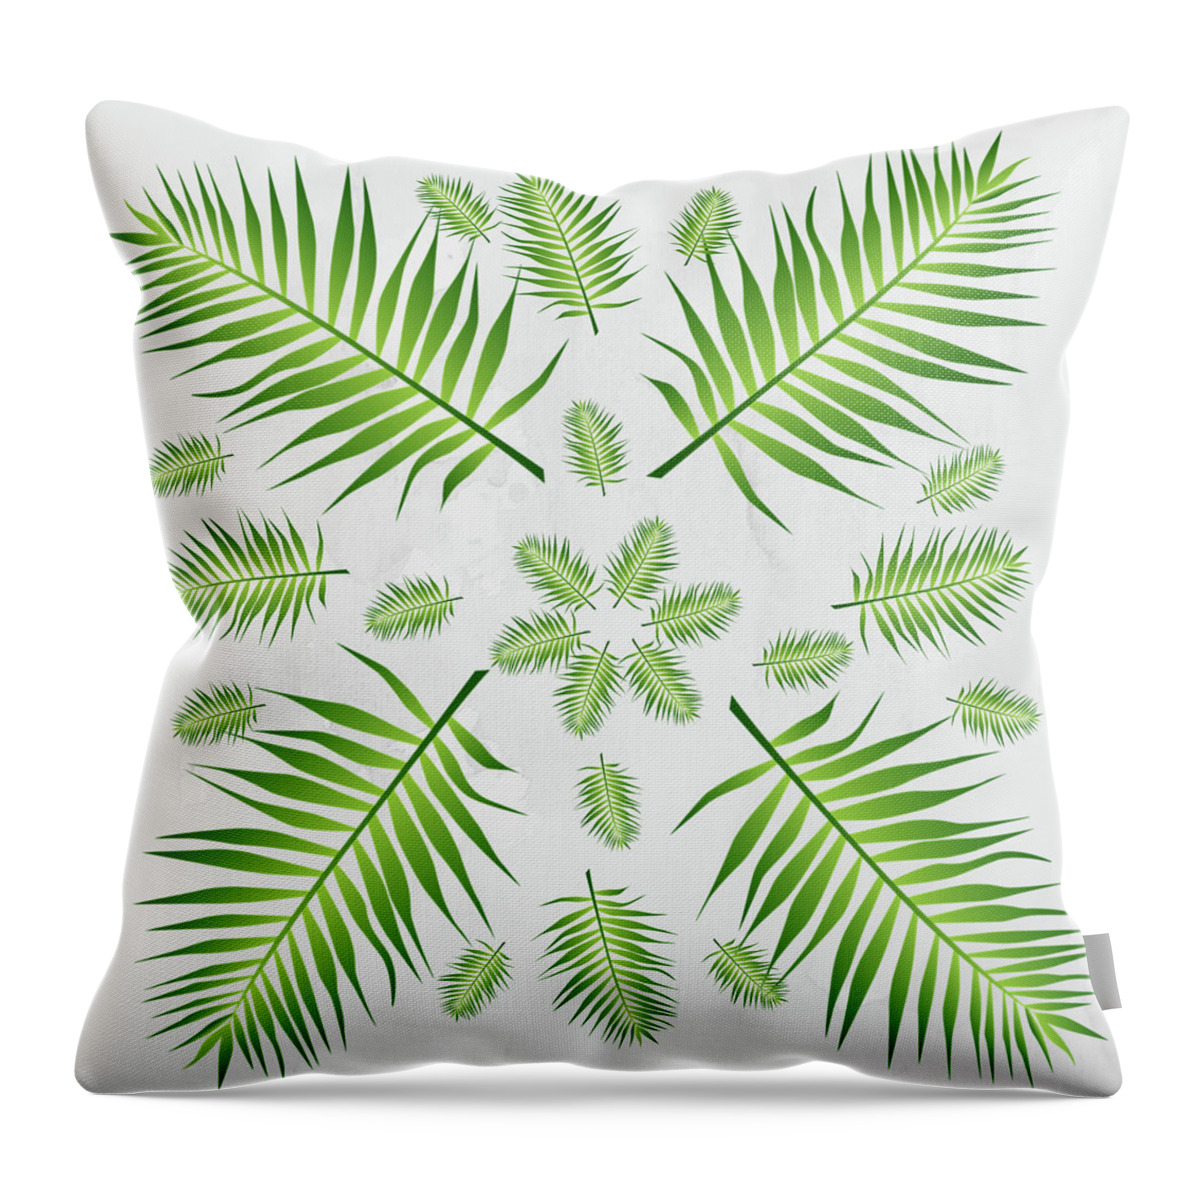 Palm Throw Pillow featuring the digital art Plethora of Palm Leaves 21 on a White Textured Background by Ali Baucom